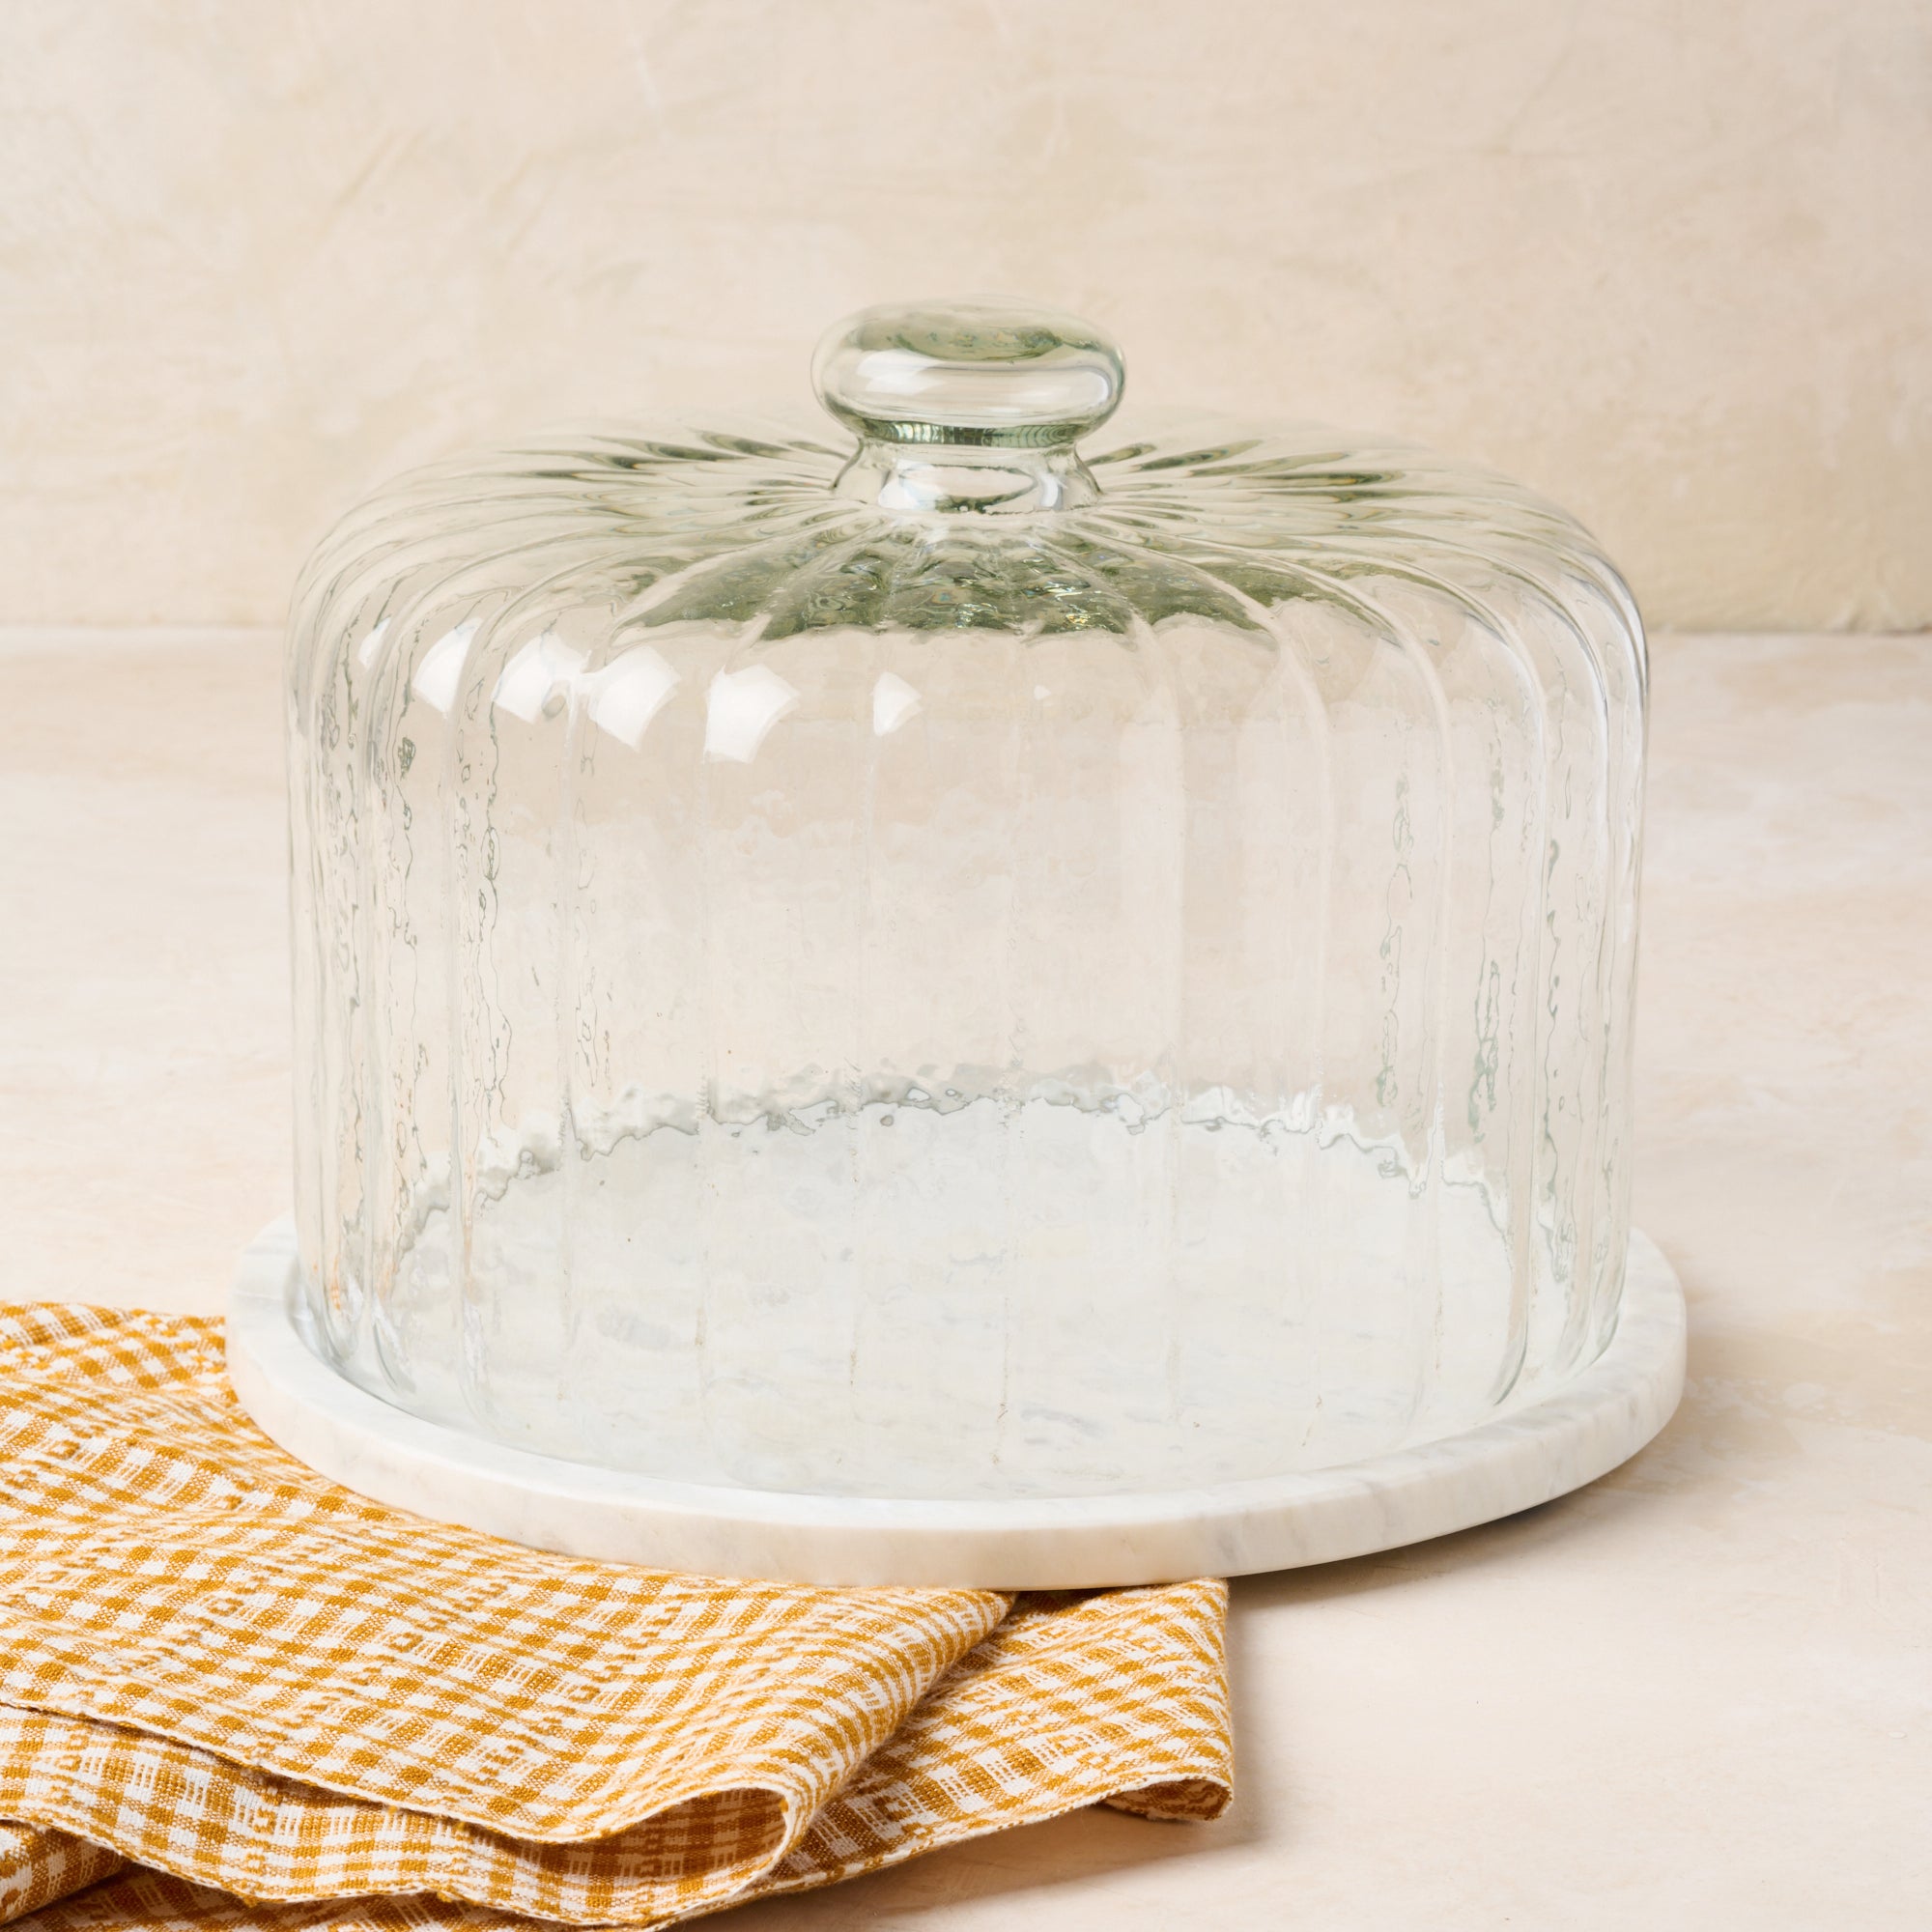 magnolia white marble fluted cake dome $86.00